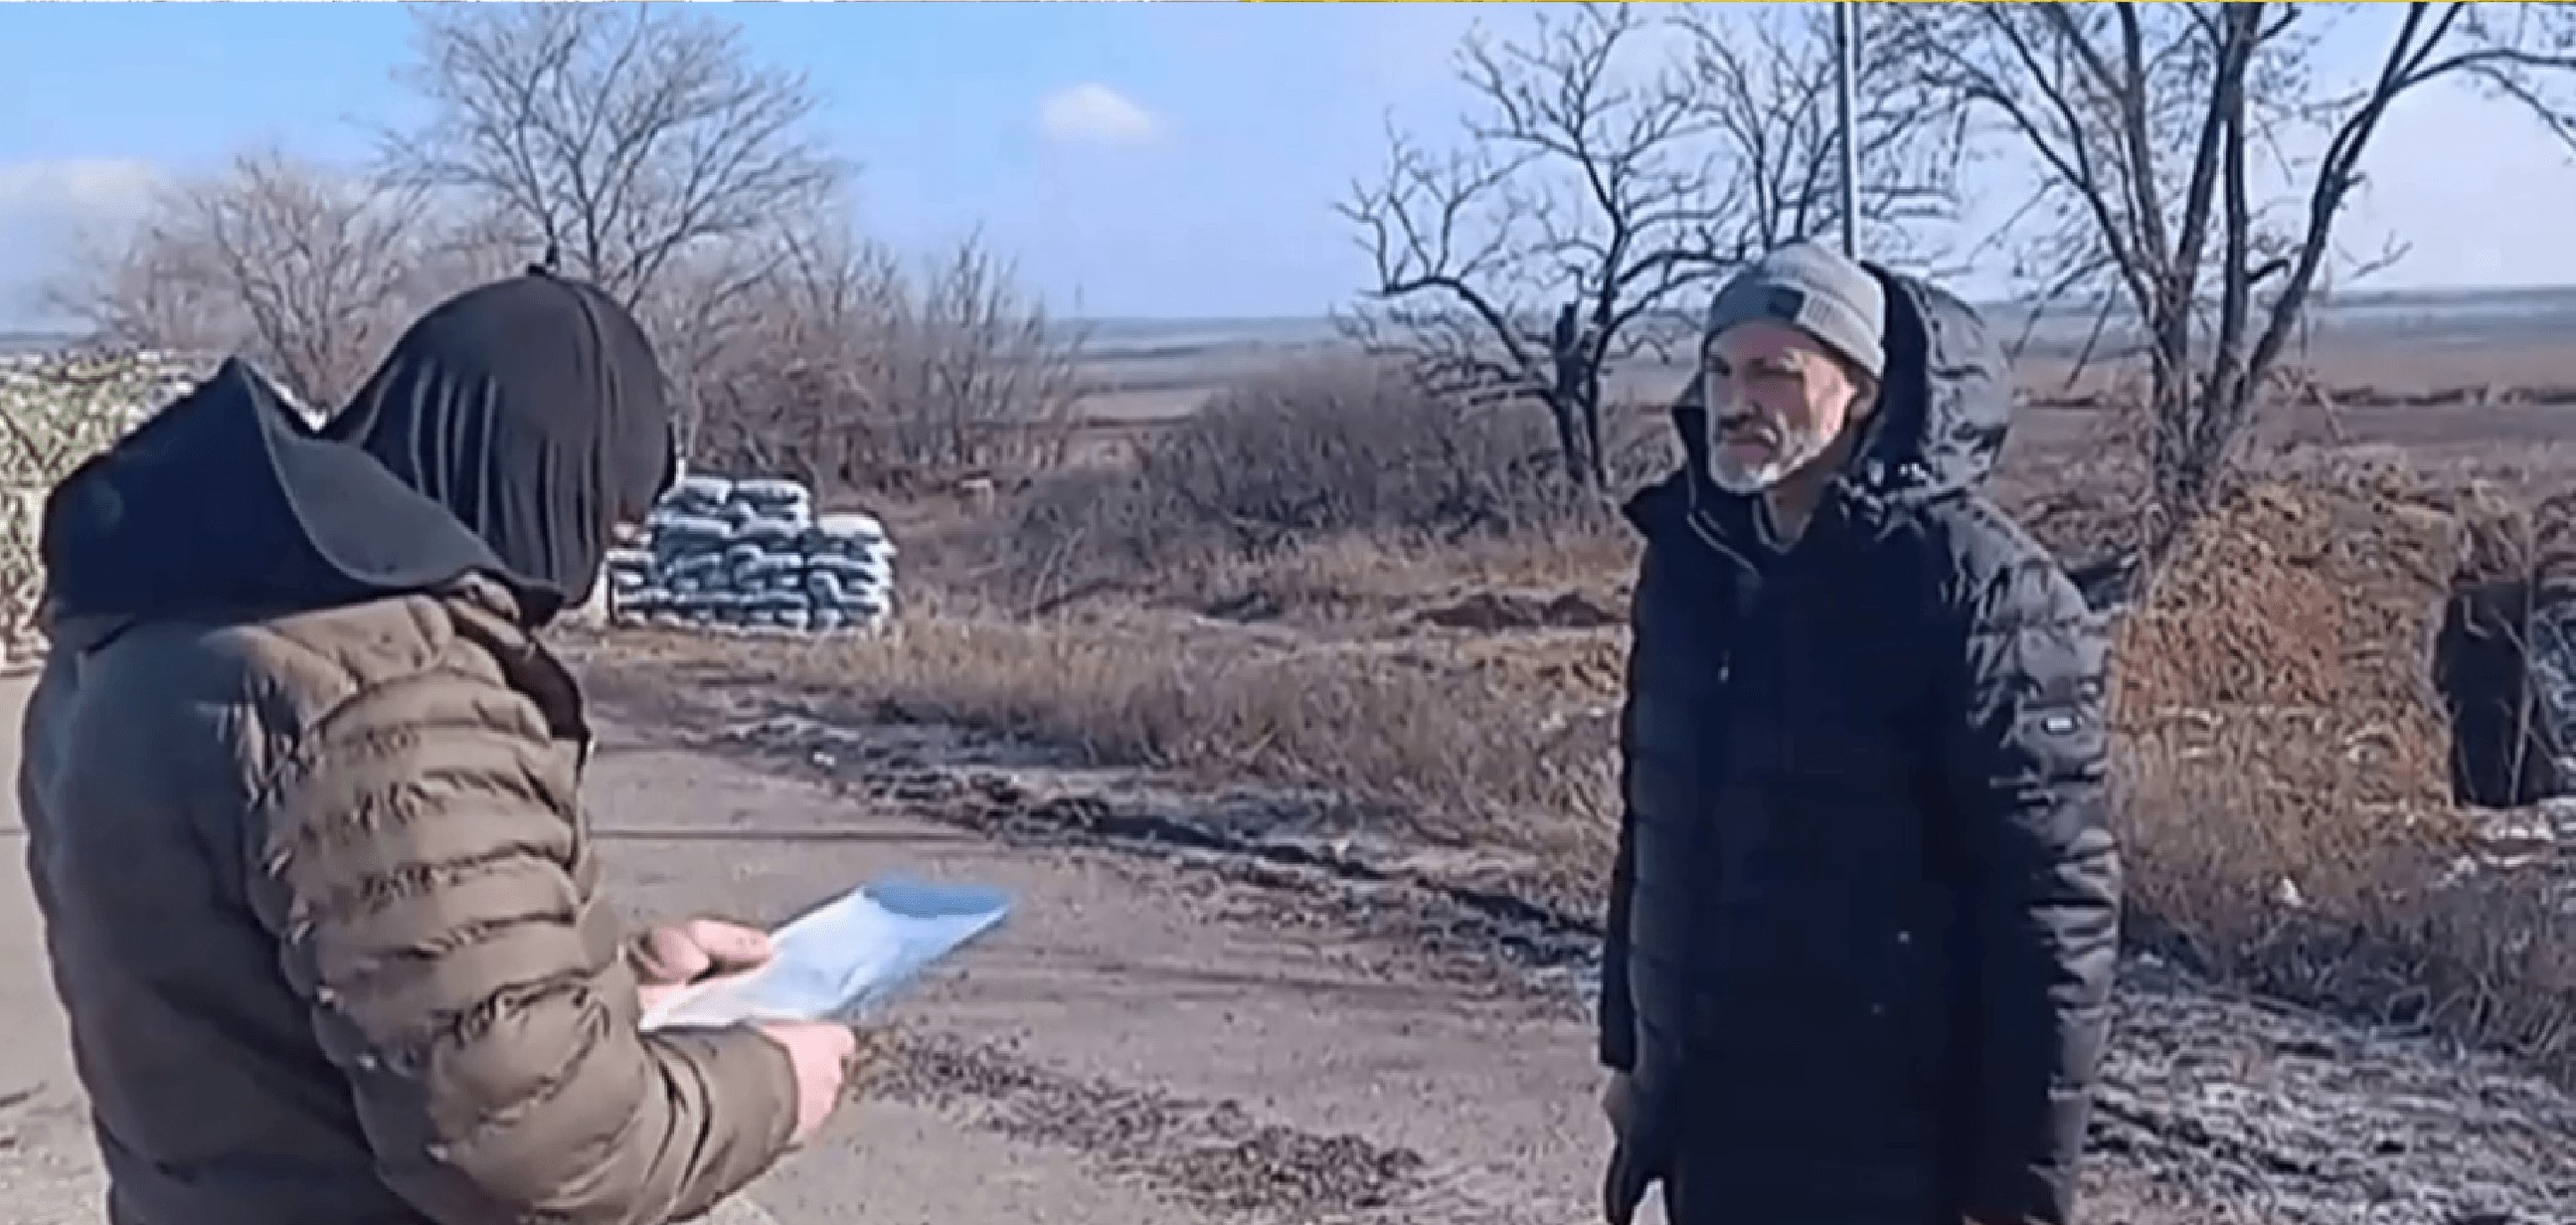 Oleksiy Brazhnyk on the staged video in which the Russian invaders were supposedly ’deporting’ him to governmnent-controlled Ukraine. He has not been seen since then